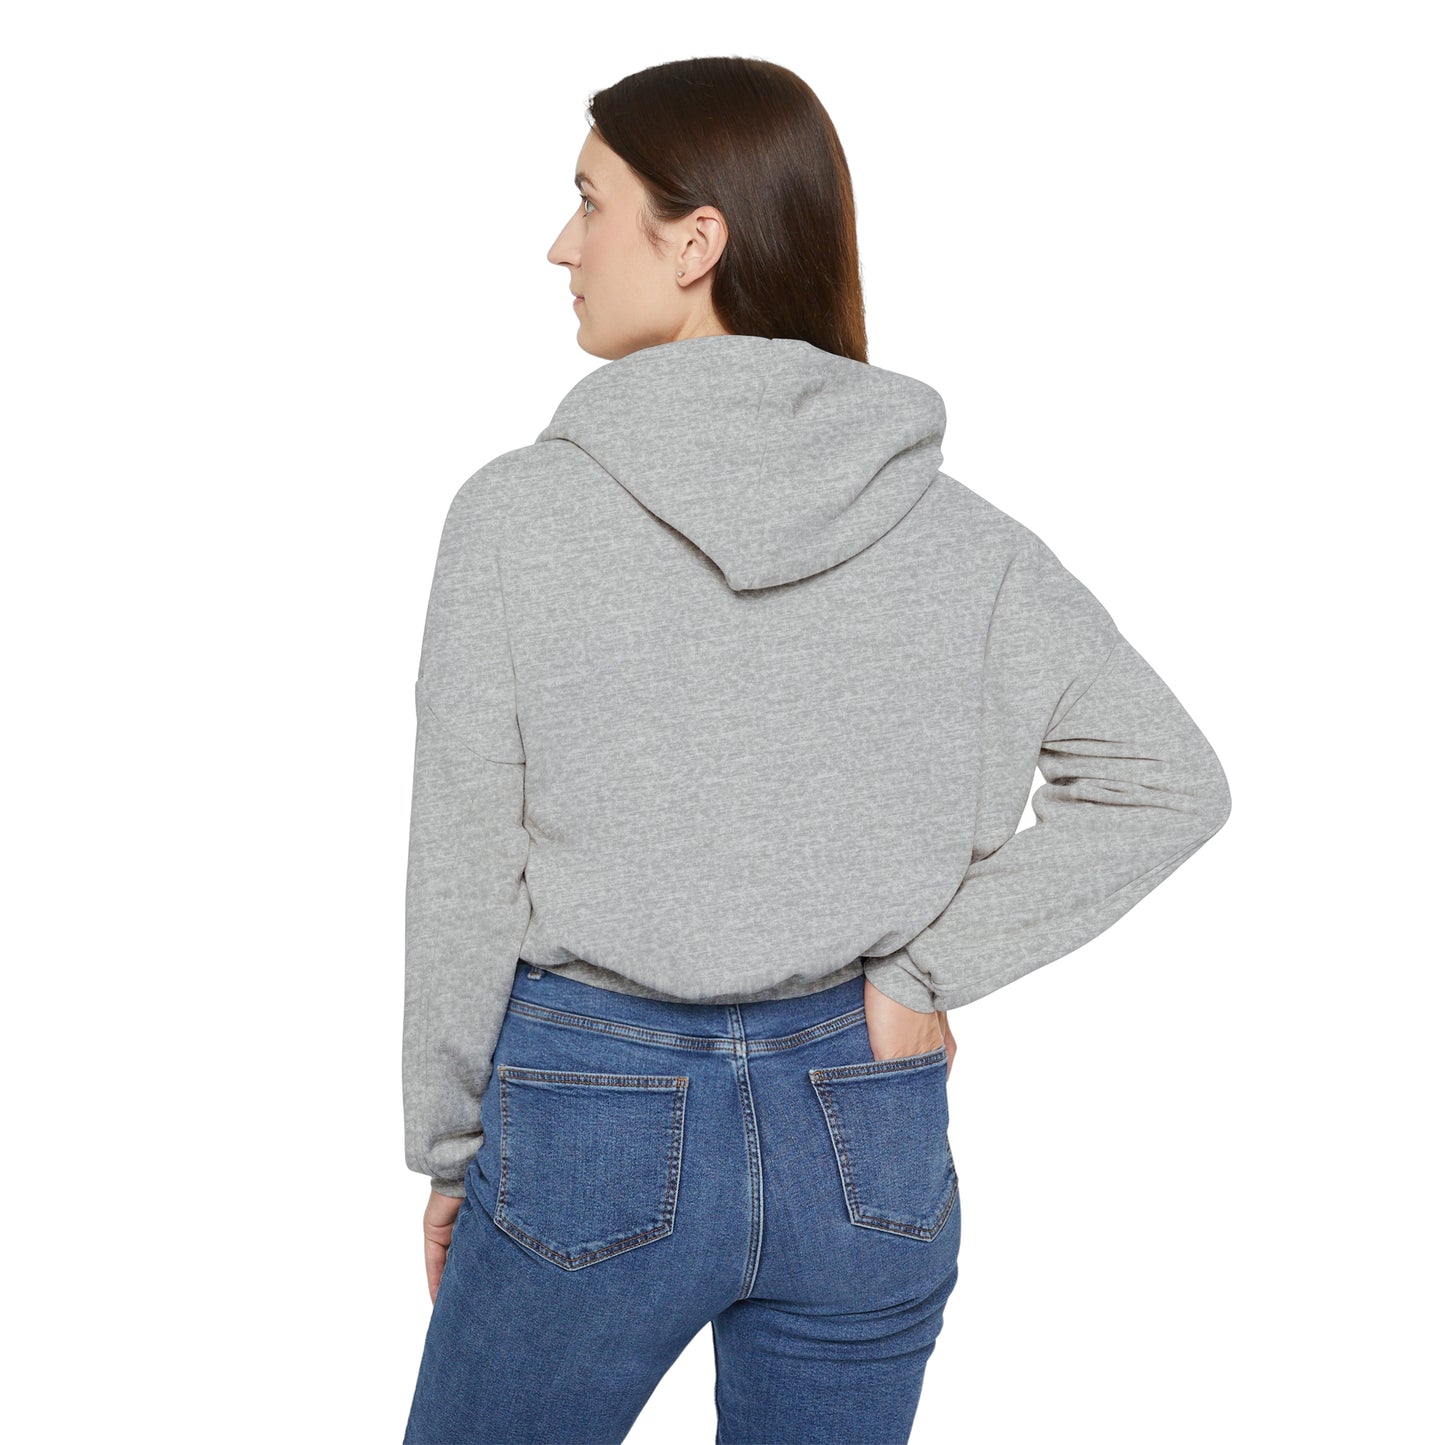 I Heart Paws. Women's Cinched Bottom Hoodie